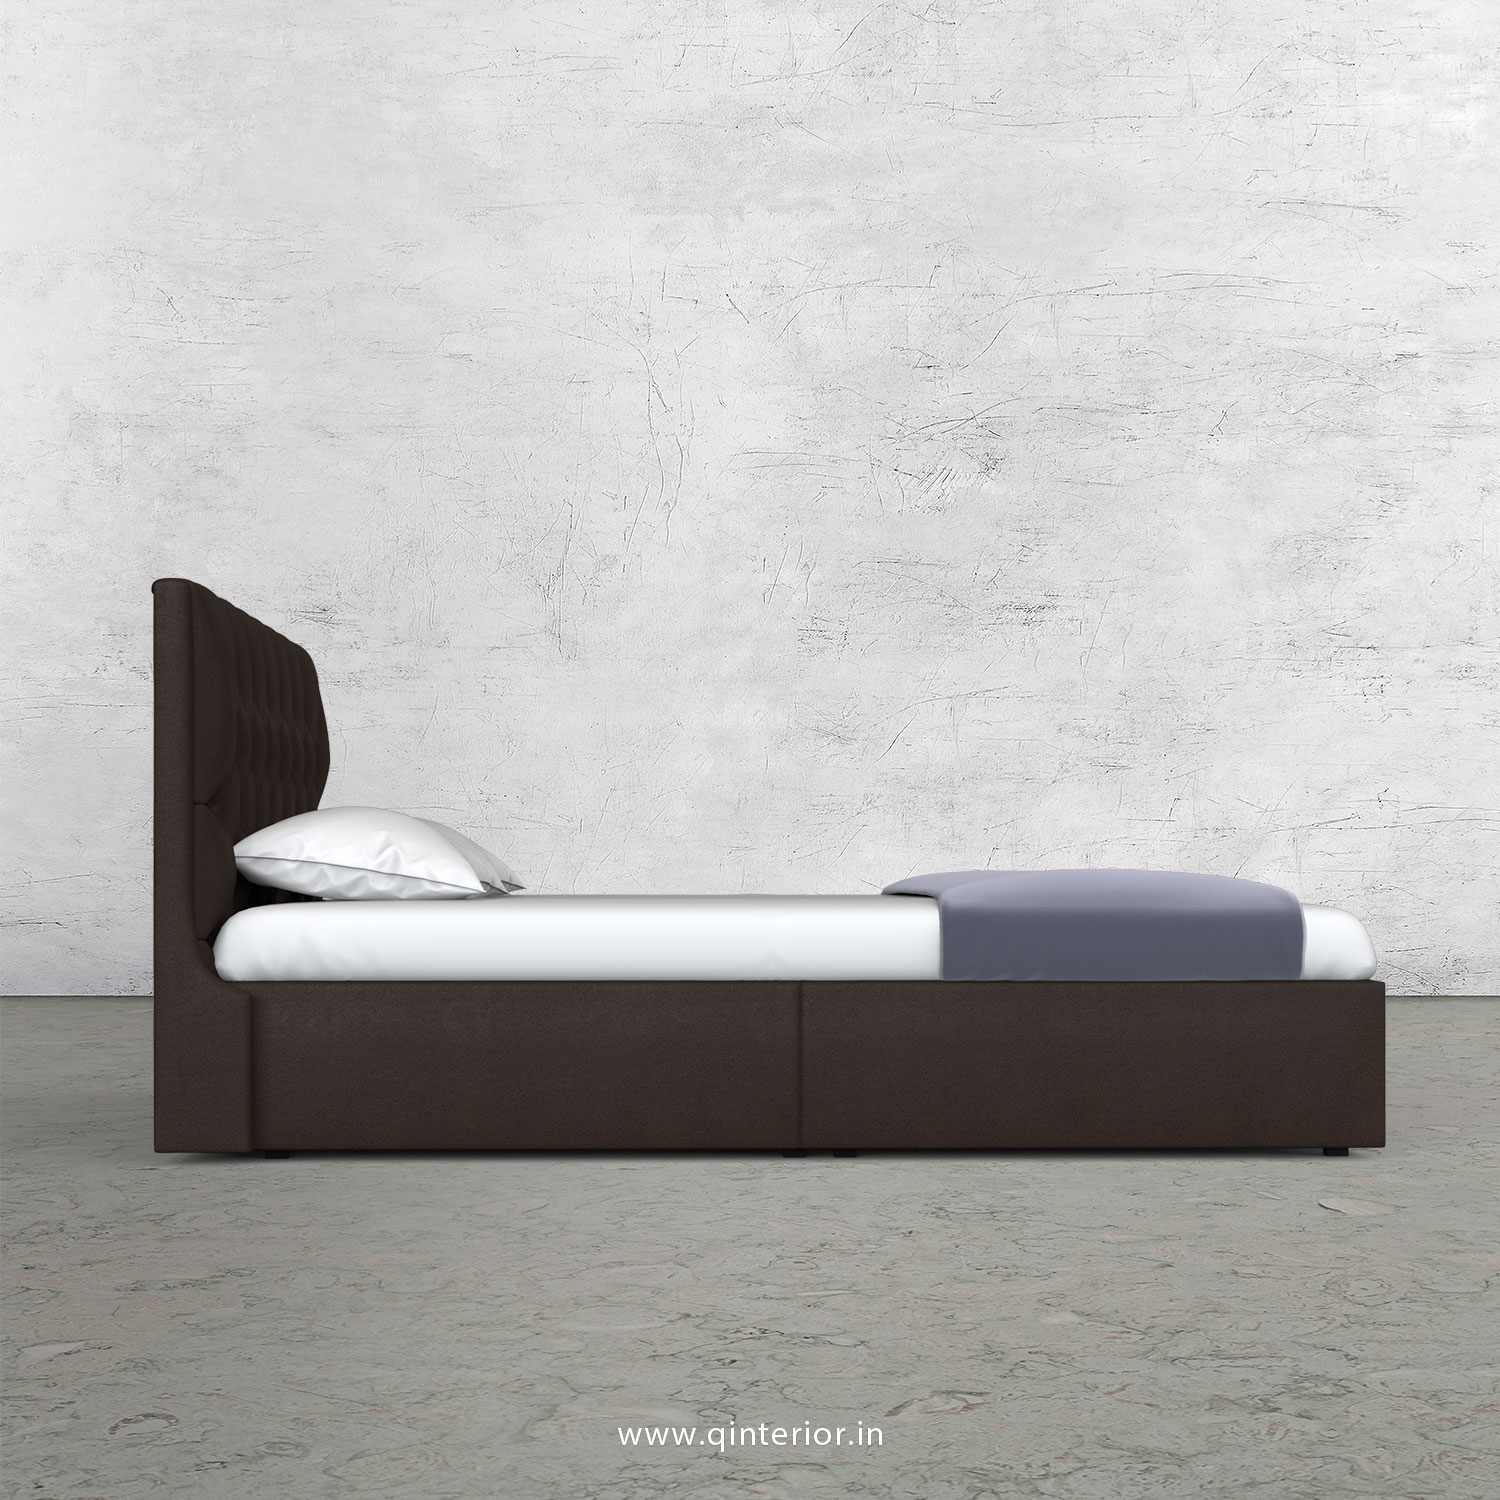 Scorpius Queen Storage Bed in Fab Leather Fabric - QBD001 FL16